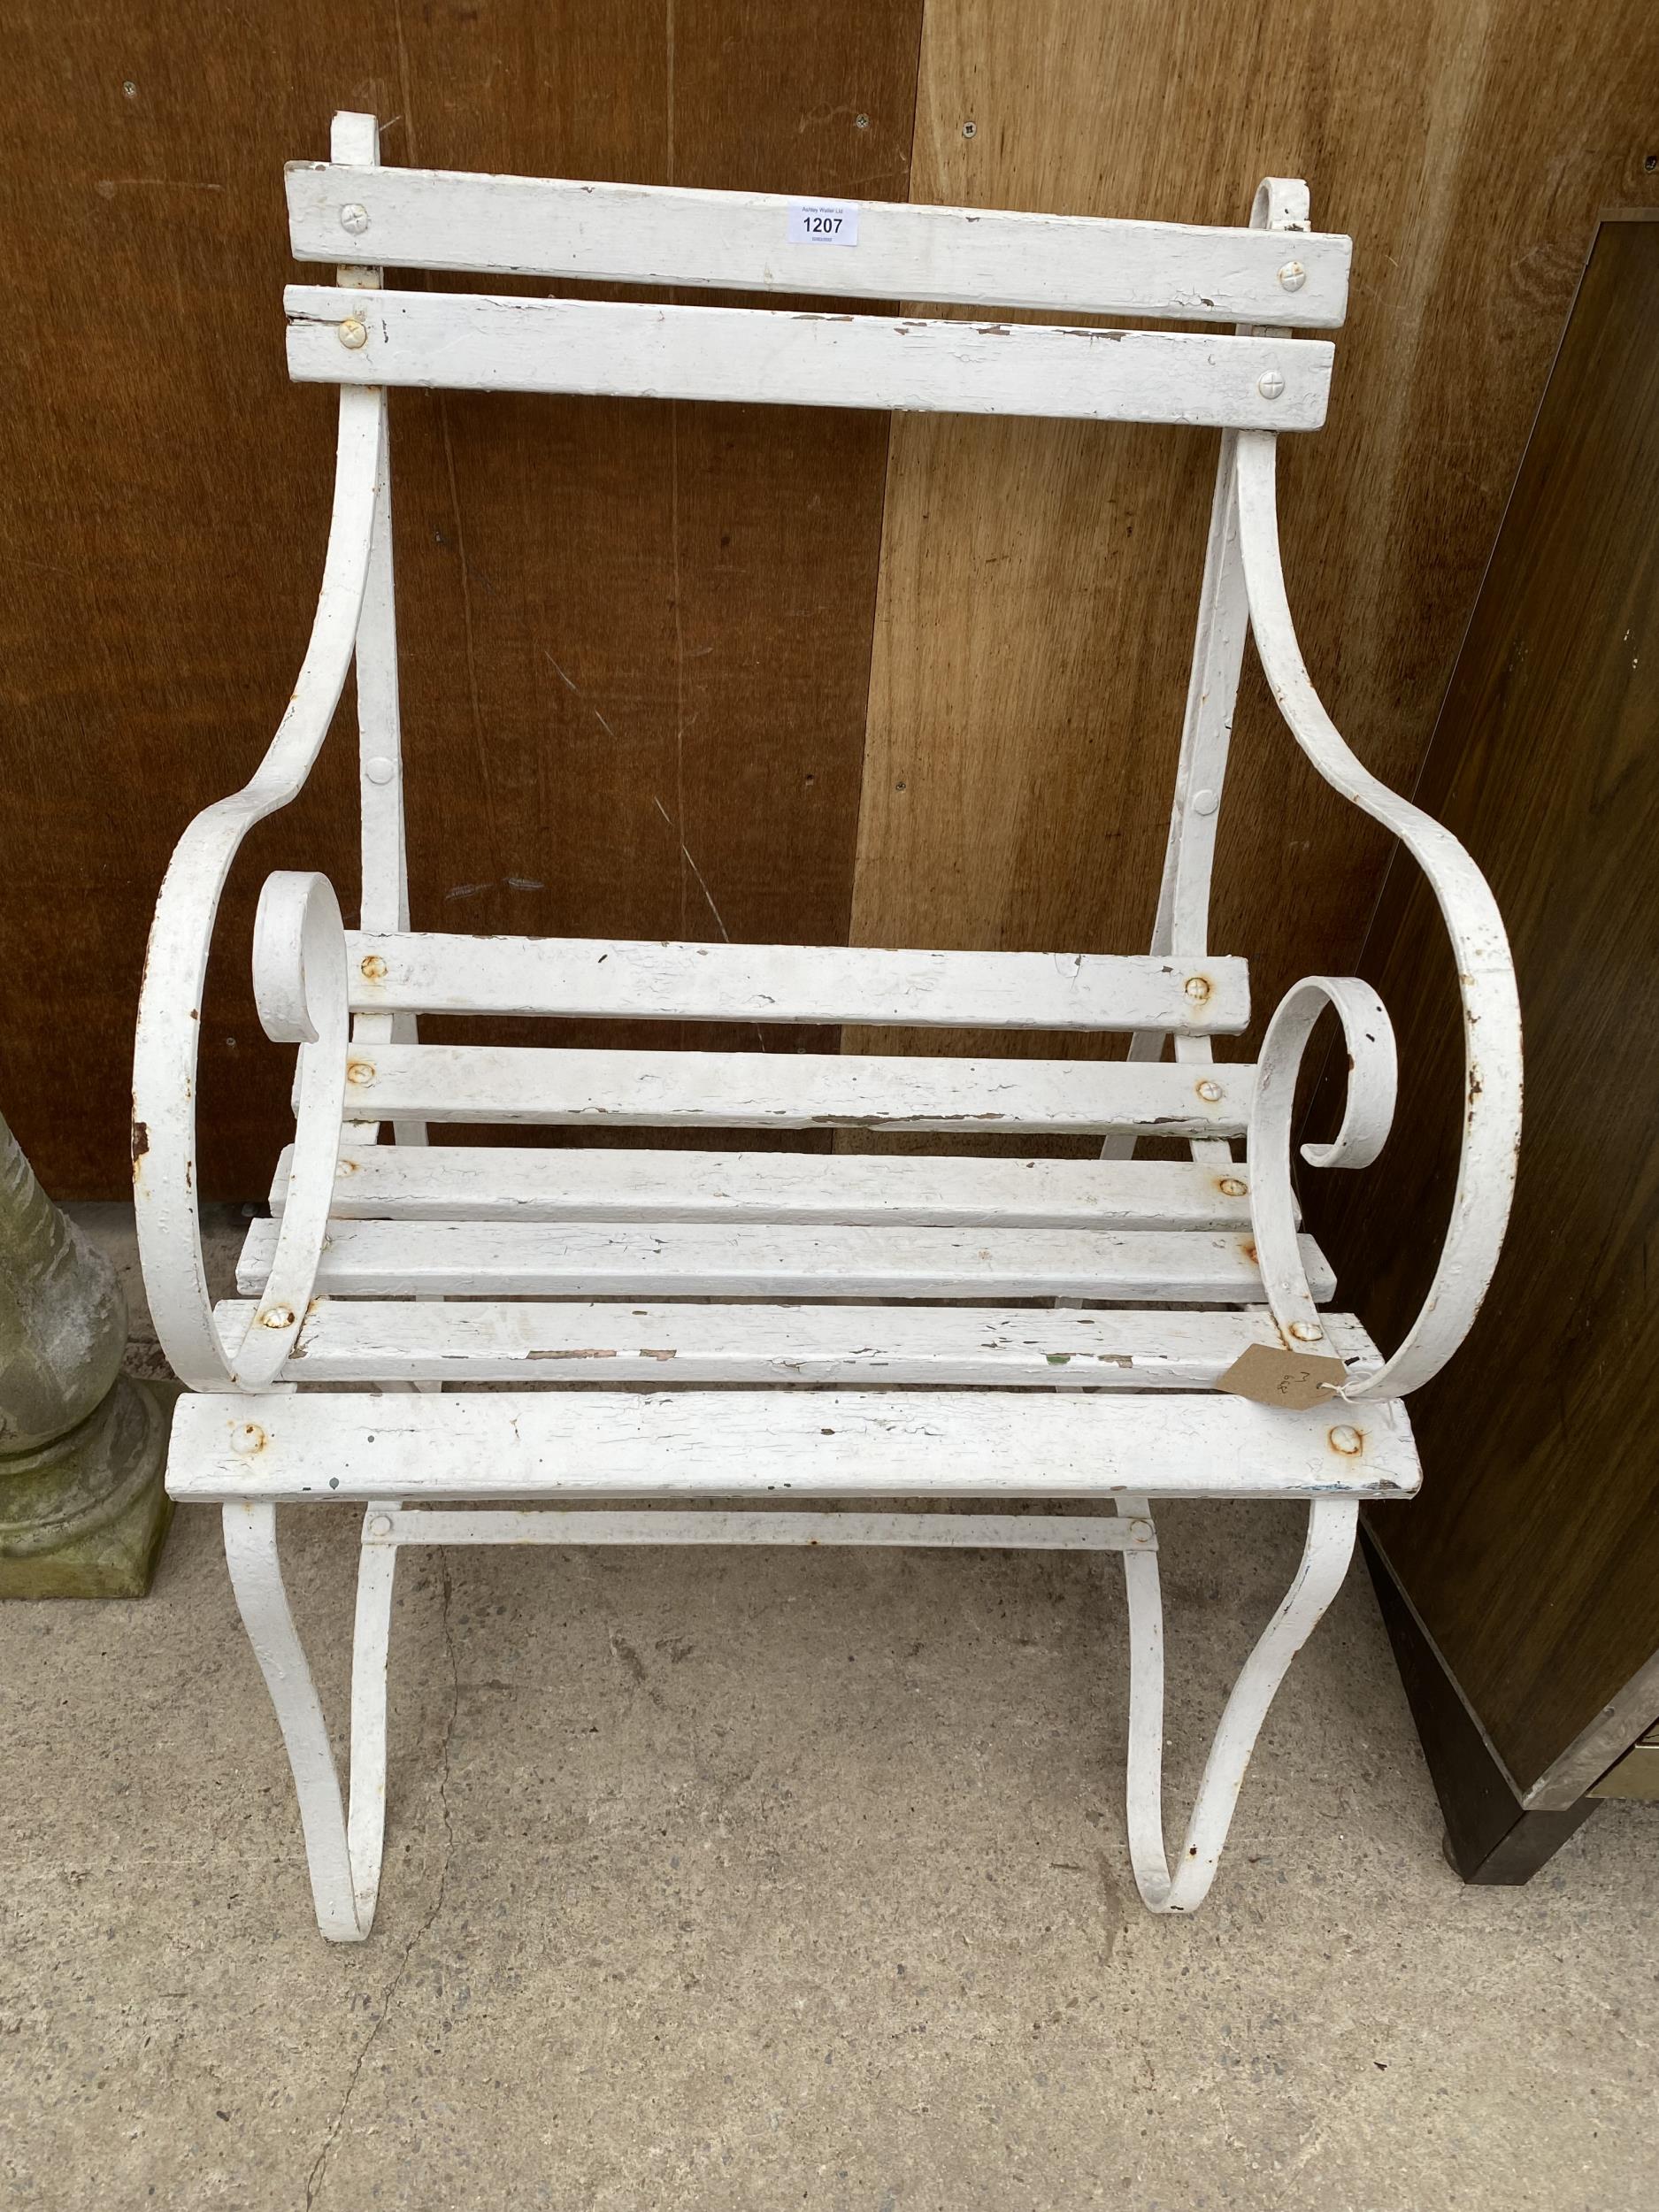 A VINTAGE ARM CHAIR WITH WROUGHT IRON ENDS AND SLATTED SEAT AND BACK